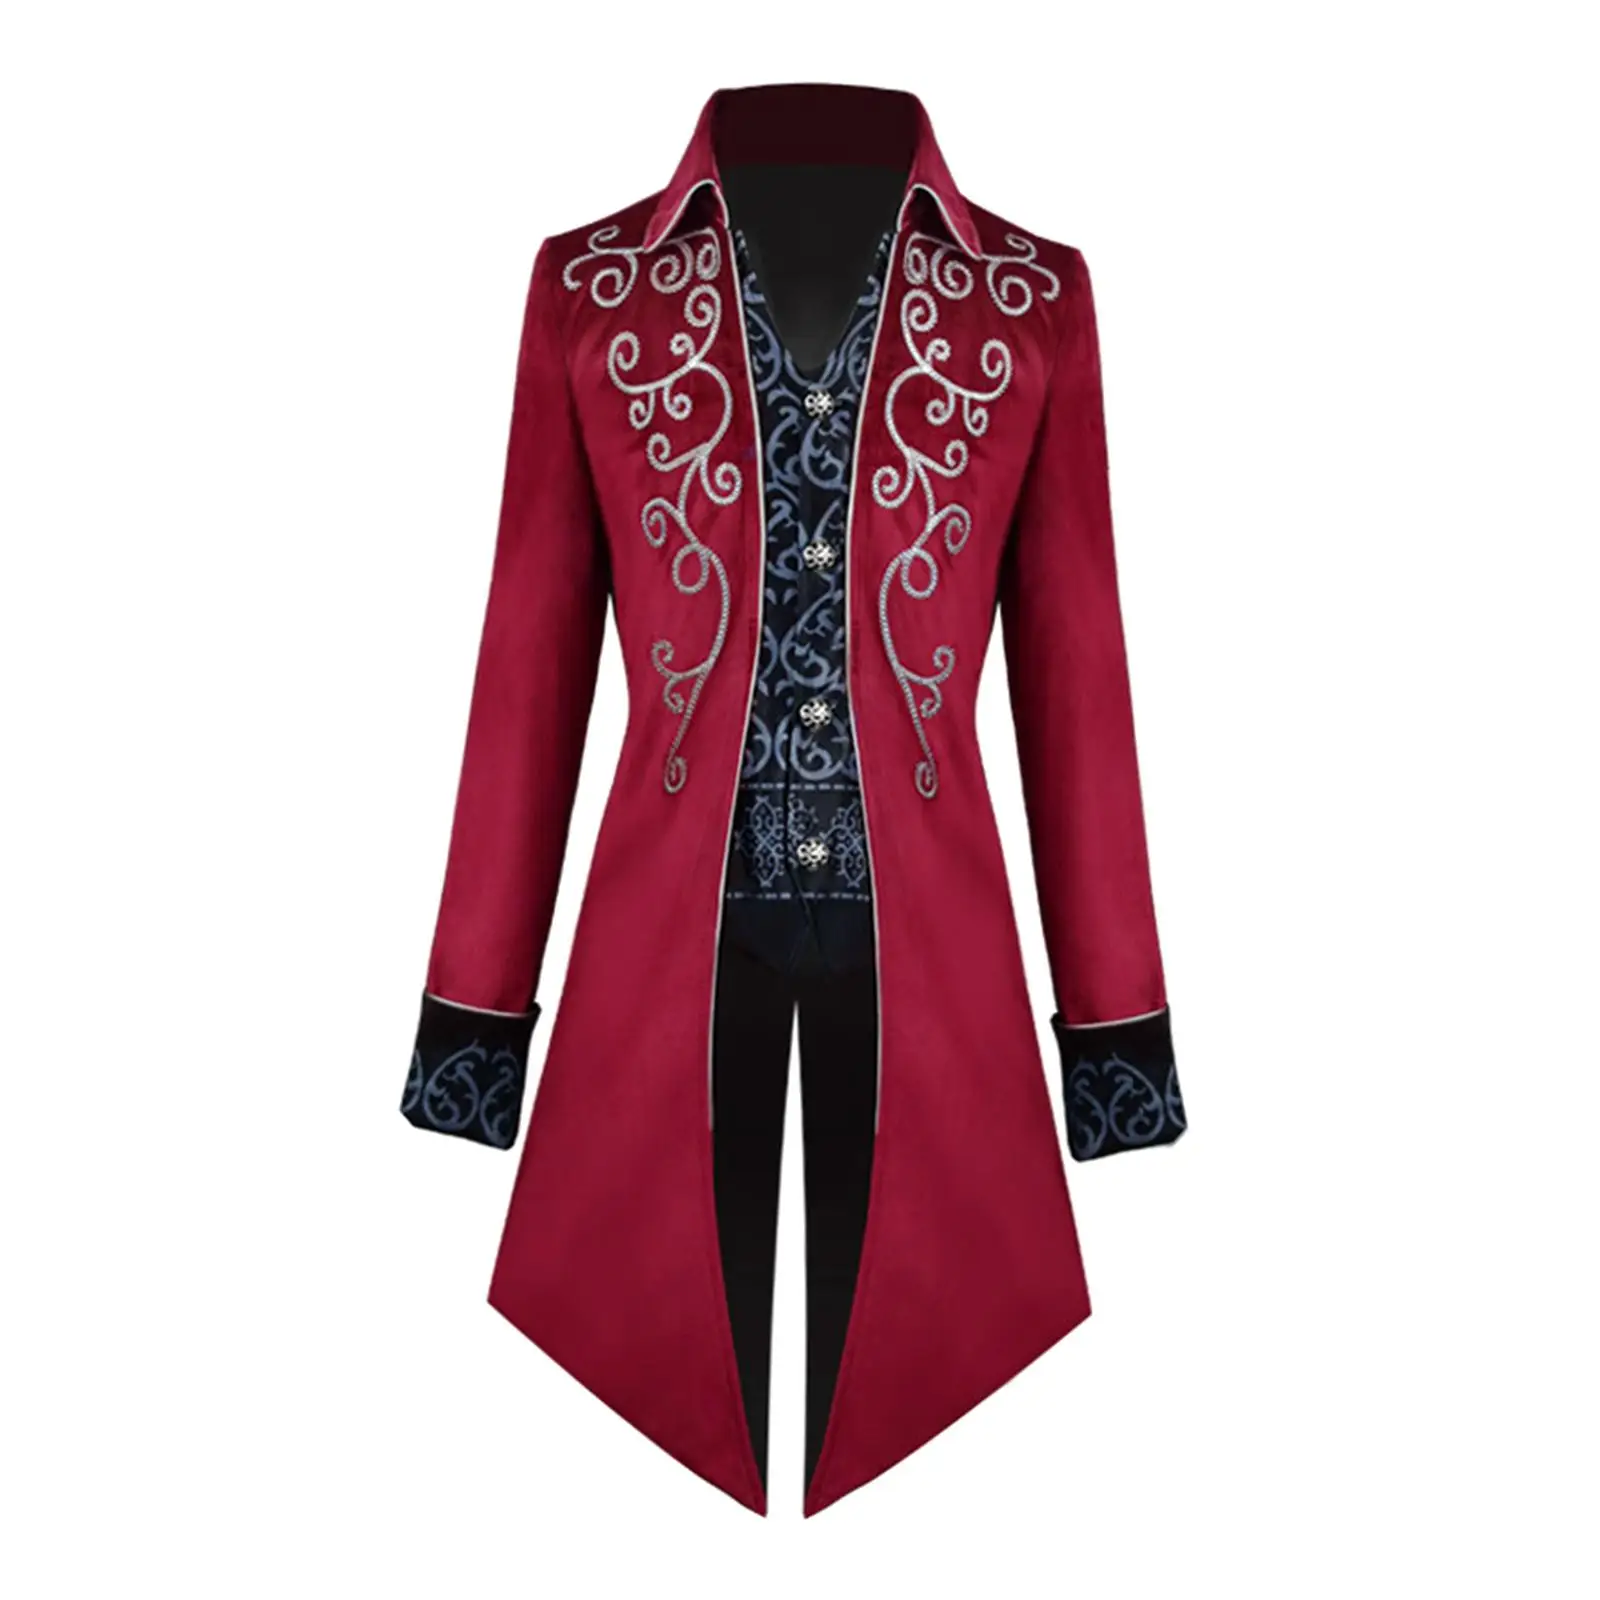 Male Lady Medieval Gothic Tailcoat  Steampunk Lapel Long Coat Trench Coat Jacket for Viking Cosplay Party Halloween Stage